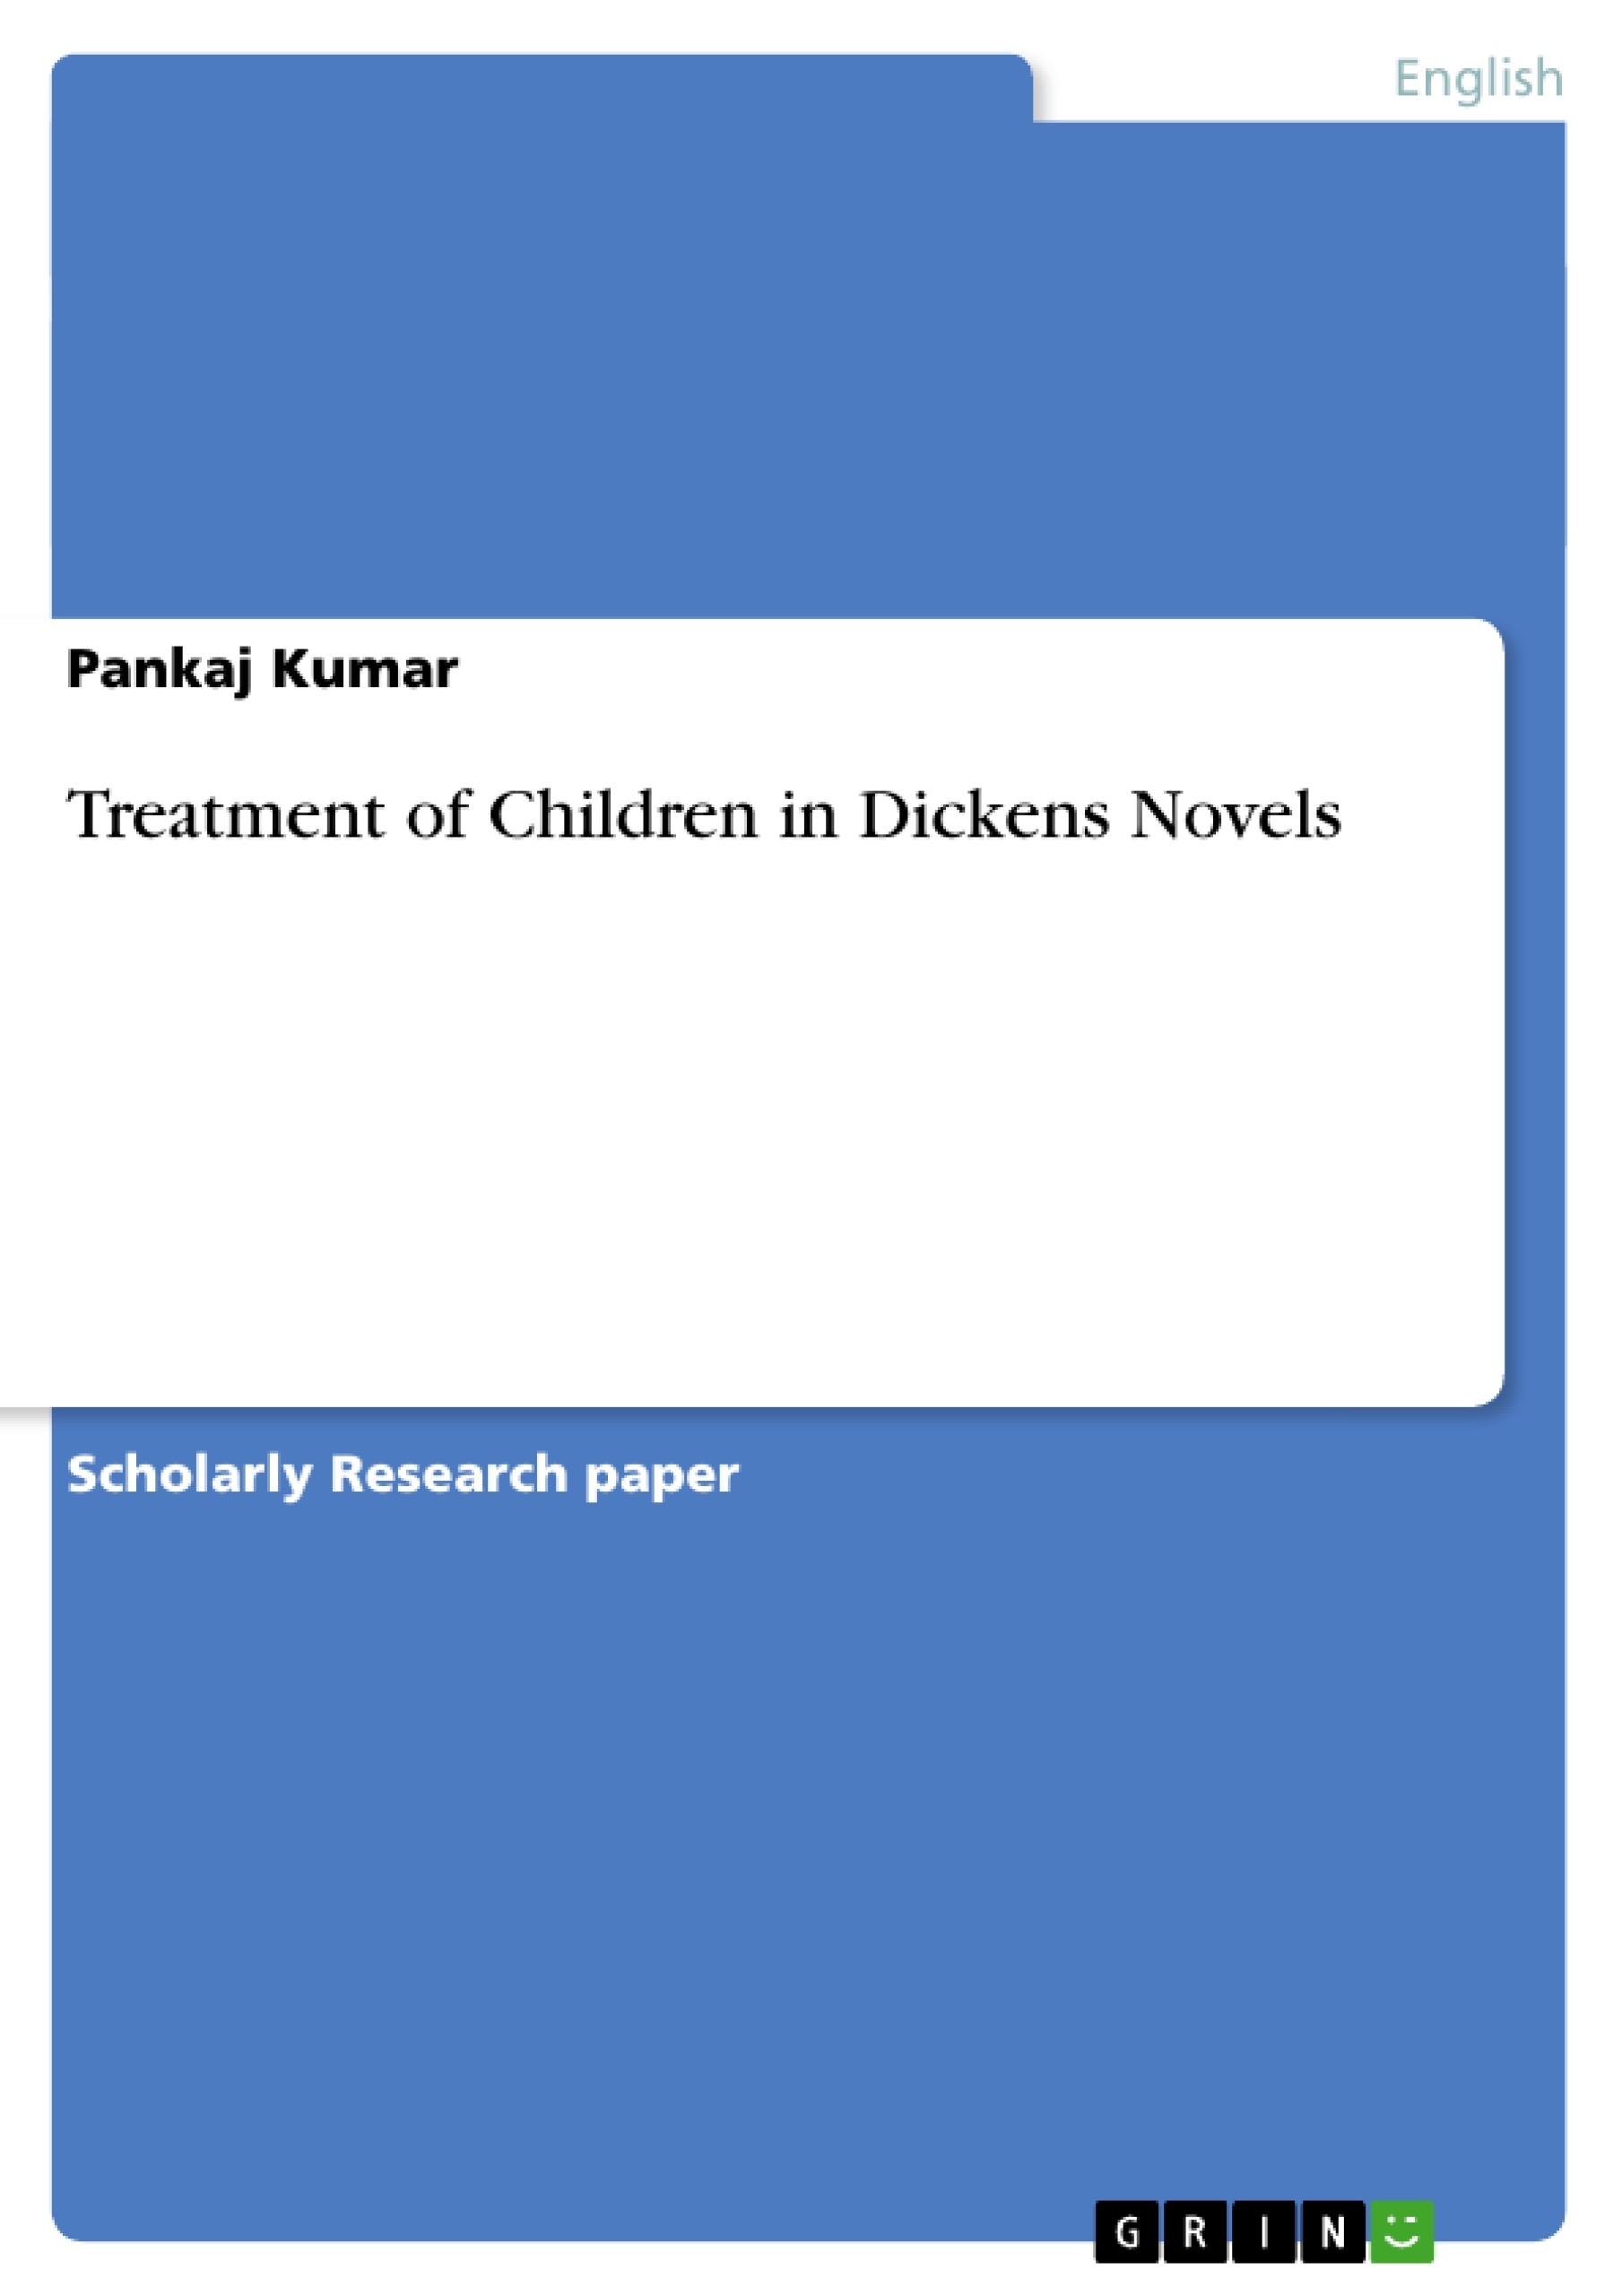 Title: Treatment of Children in Dickens Novels